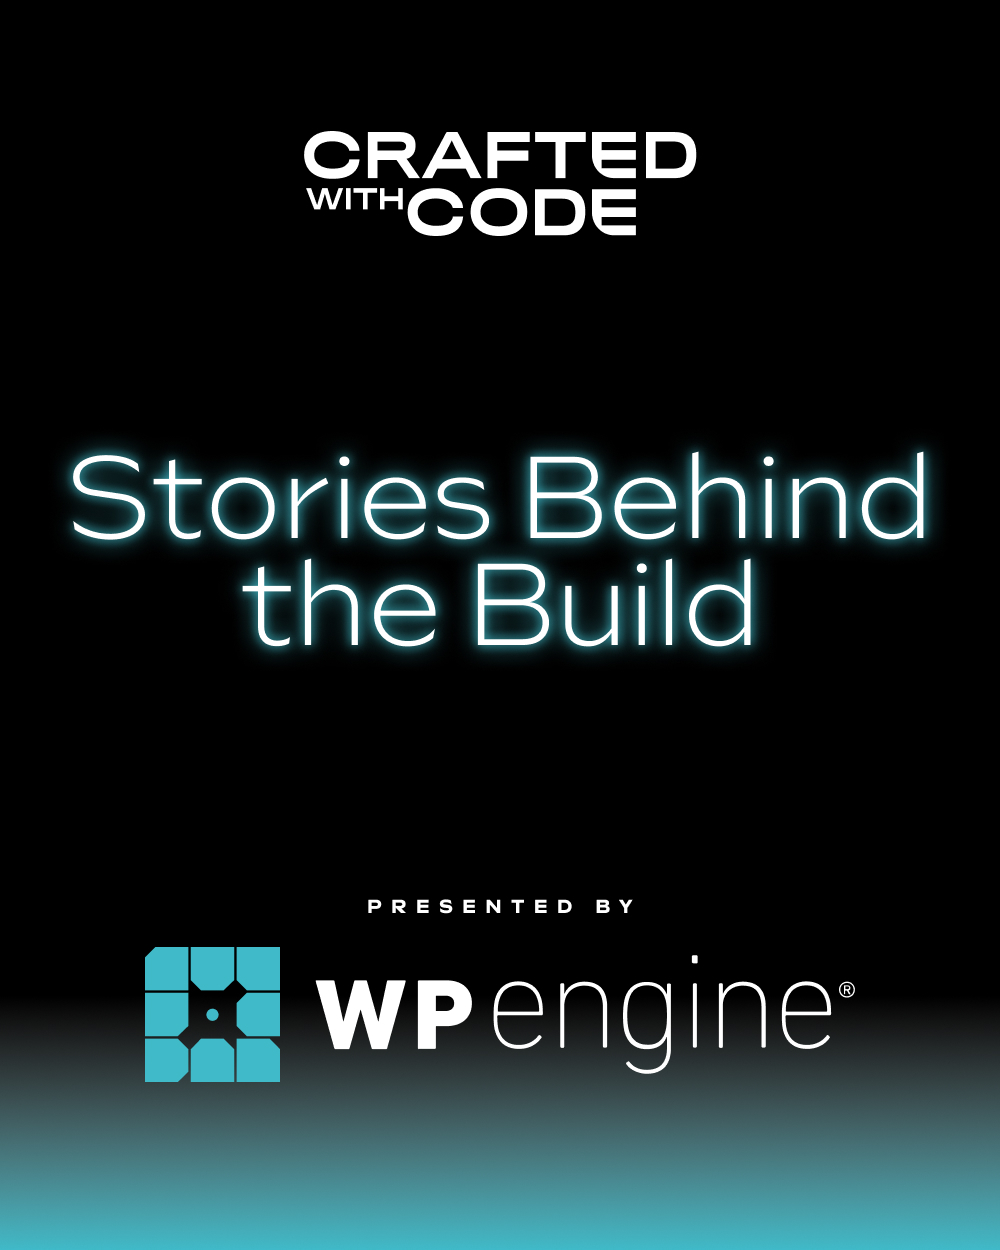 The Stories Behind the Build